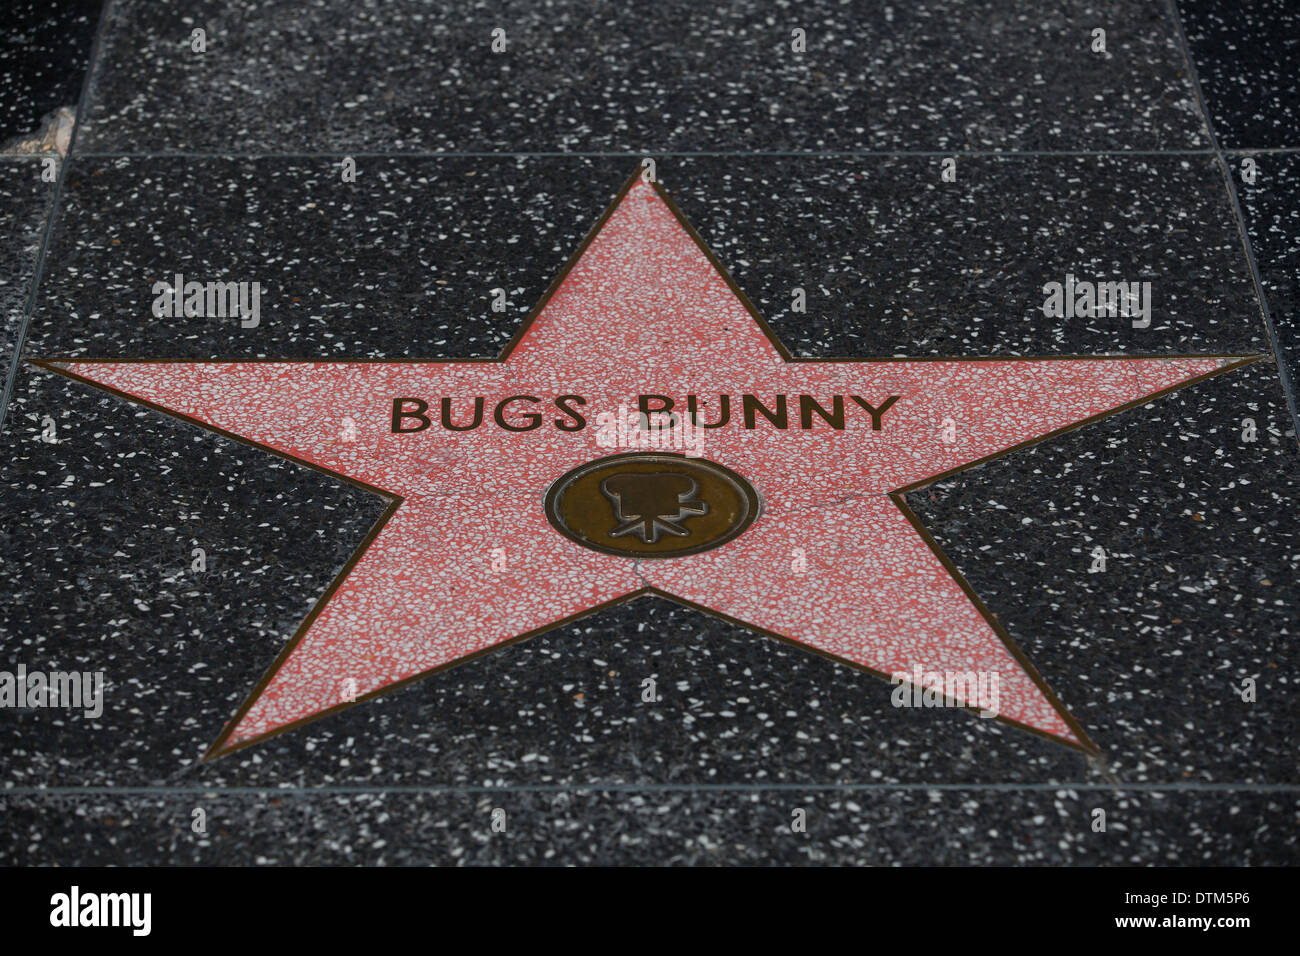 LOS ANGELES,CA-JULY 2,2011:Bugs Bunny's star in the Hollywood Walk of Fame,Los Angeles,July 2,2011 Stock Photo